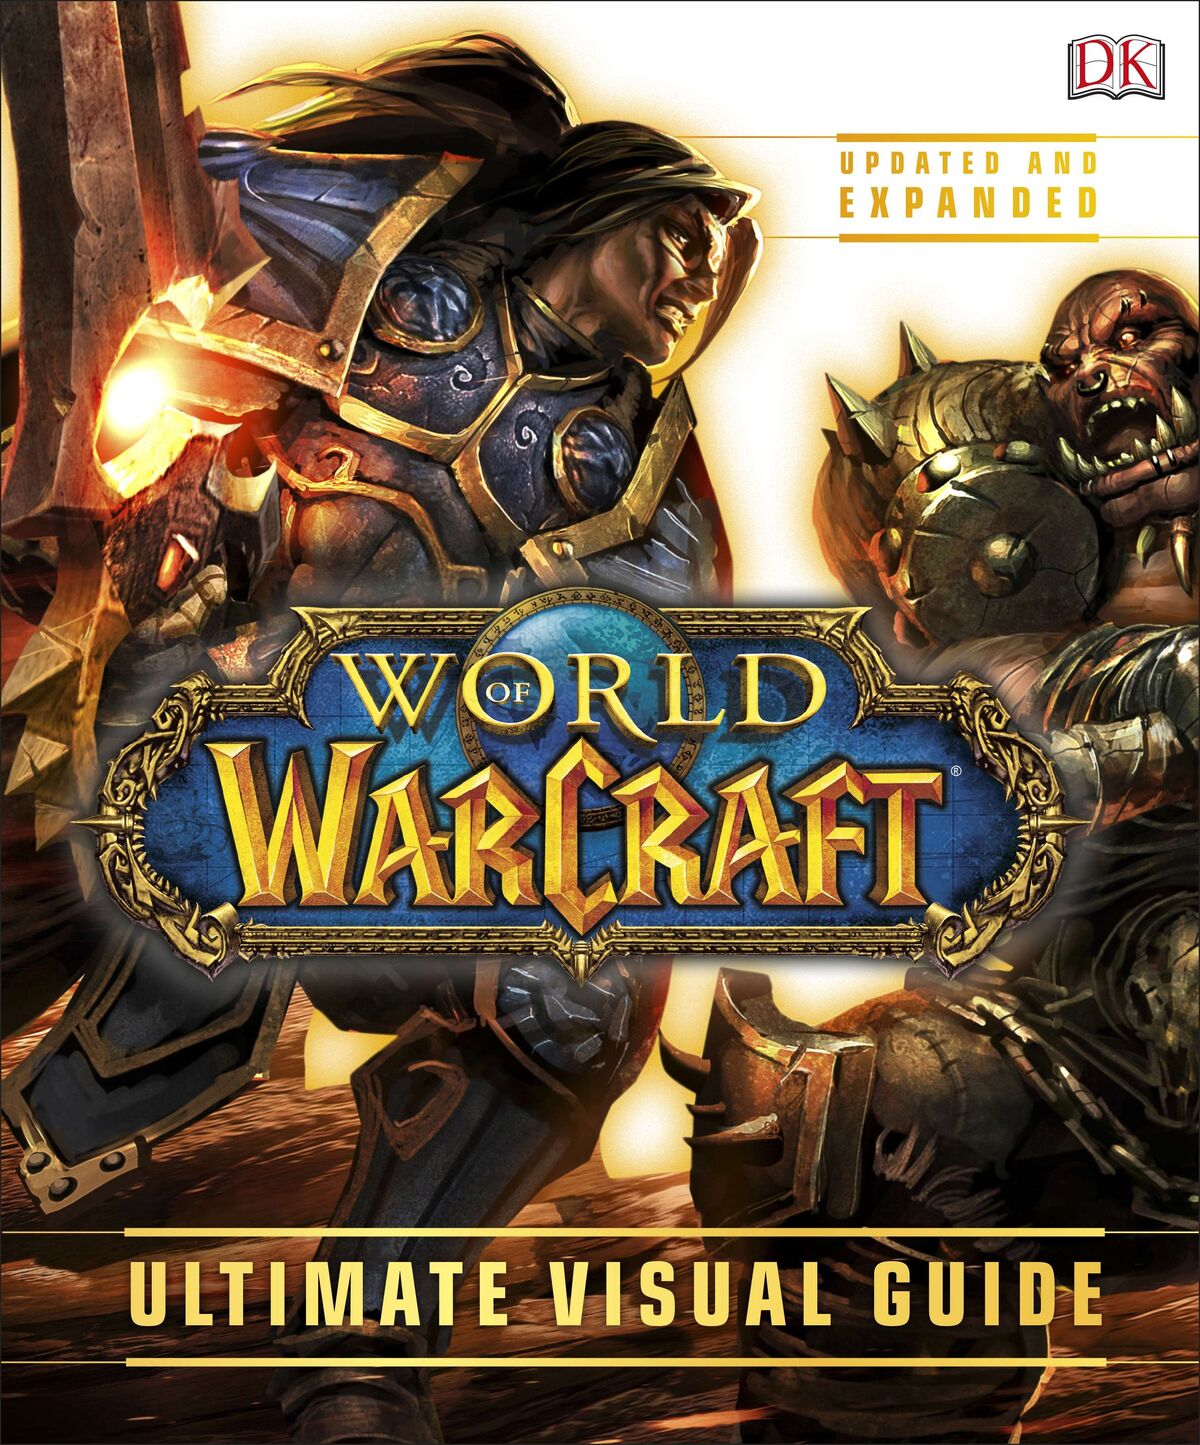 Ven'ari's Shopping List - Wowpedia - Your wiki guide to the World